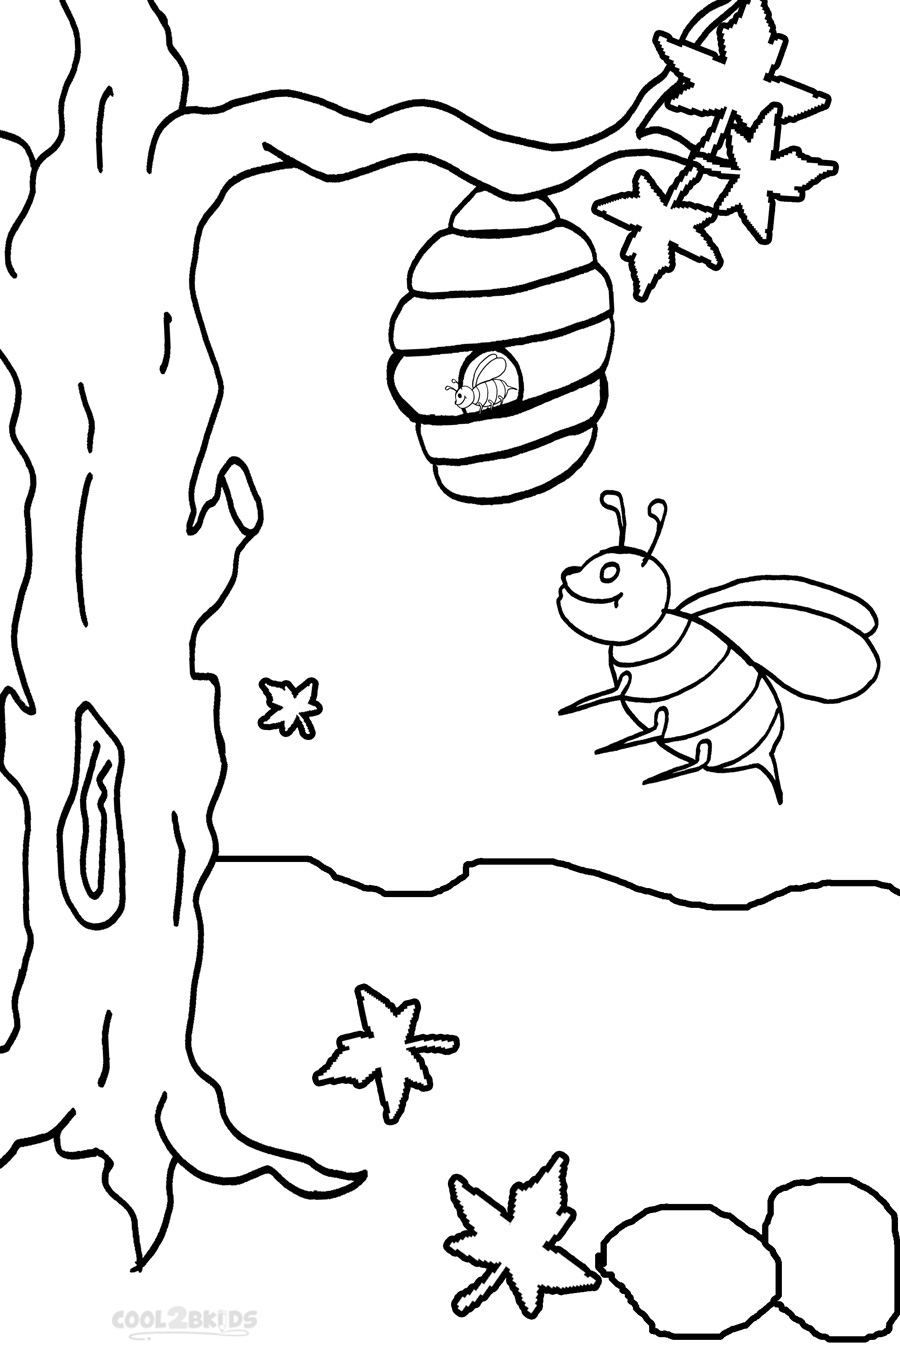 Free Printable Bumble Bee Coloring Pages Image